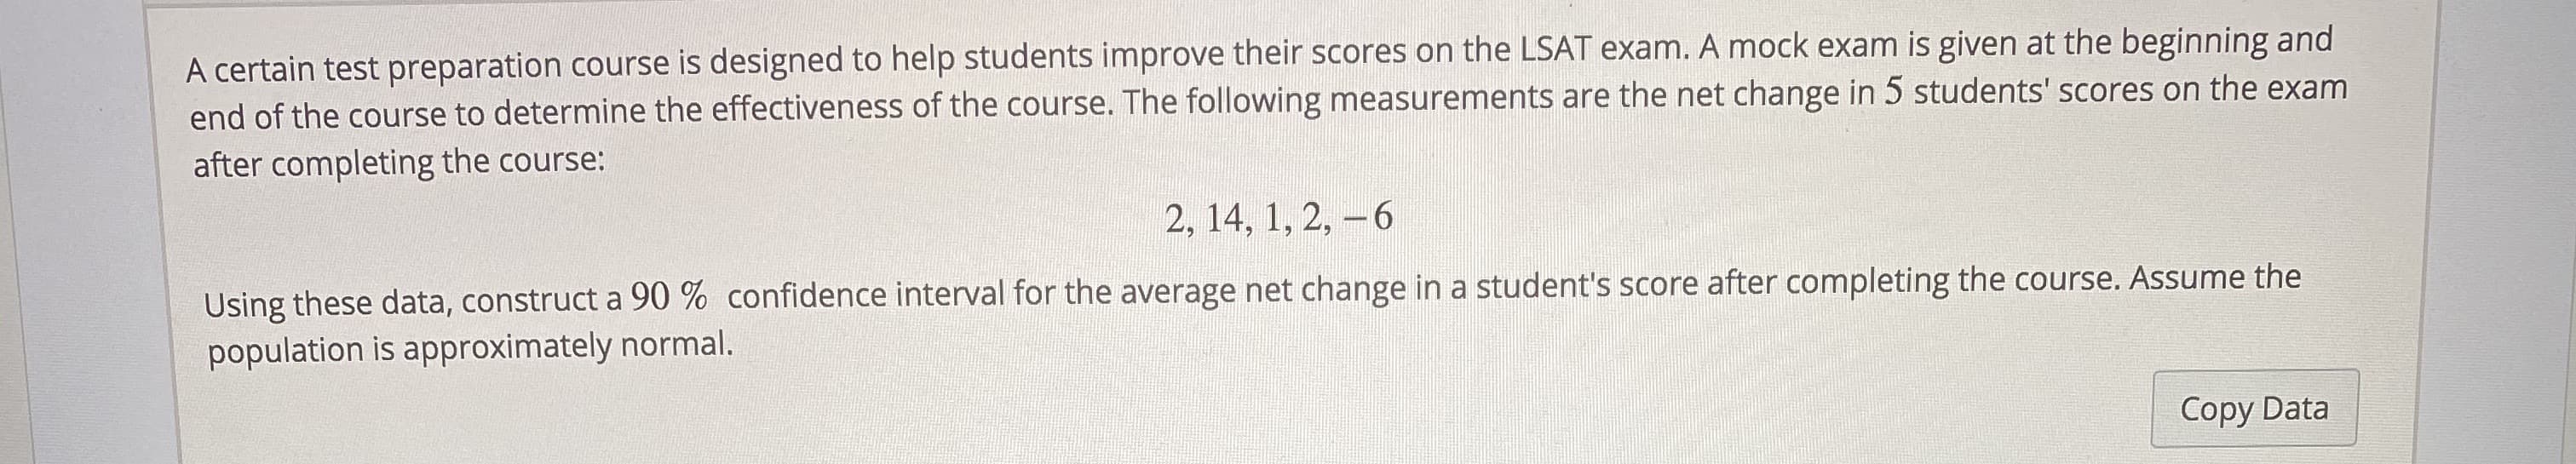 A certain test preparation course is designed to help students improve their scores on the LSAT exam. A mock exam is given at the beginning and
end of the course to determine the effectiveness of the course. The following measurements are the net change in 5 students' scores on the exam
after completing the course:
2, 14, 1, 2, -6
Using these data, construct a 90 % confidence interval for the average net change in a student's score after completing the course. Assume the
population is approximately normal.
Copy Data
